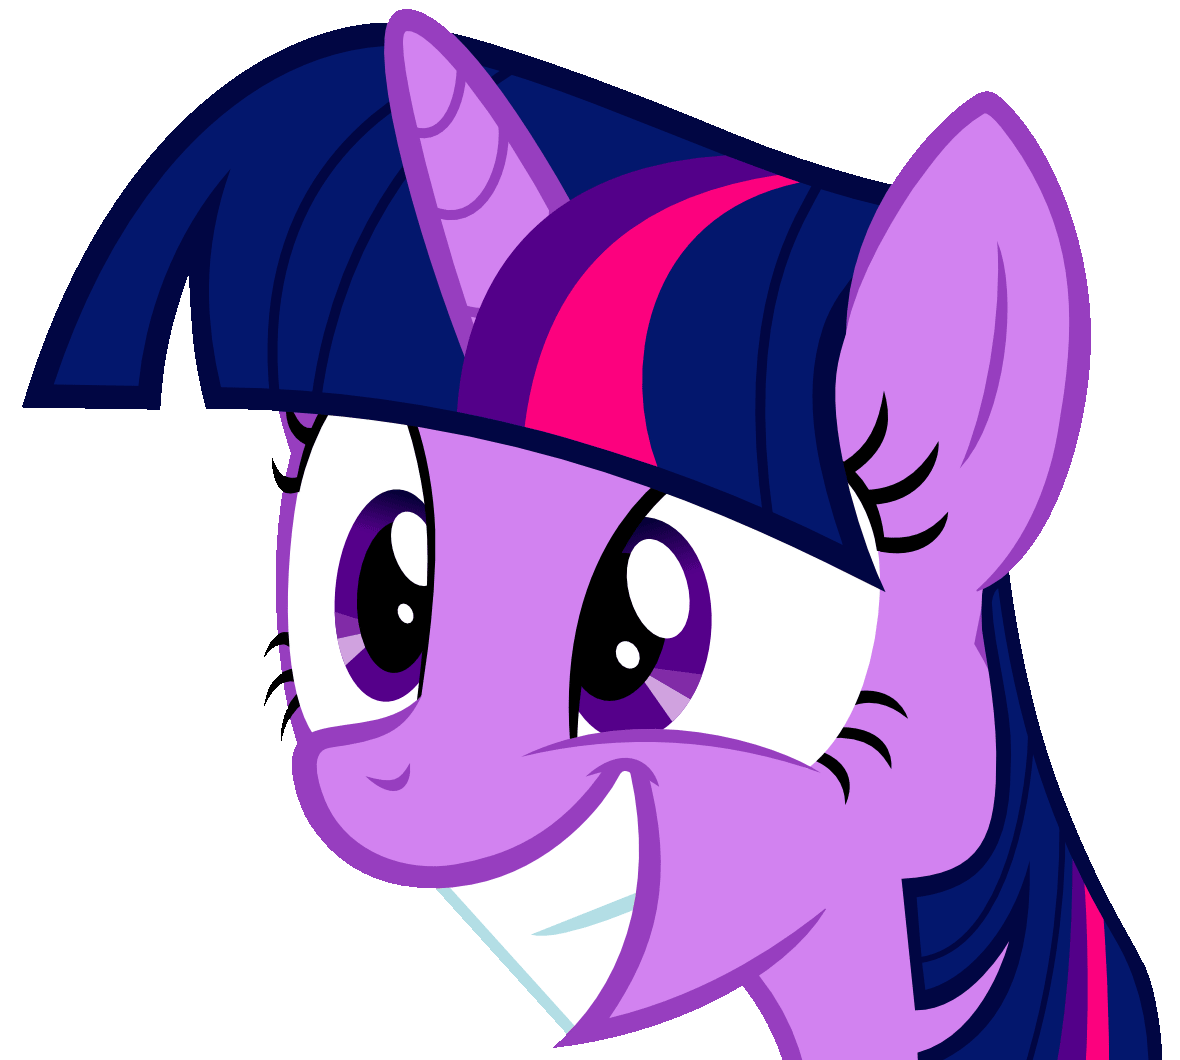 Twilight Sparkle squeeface by Iks83 on DeviantArt